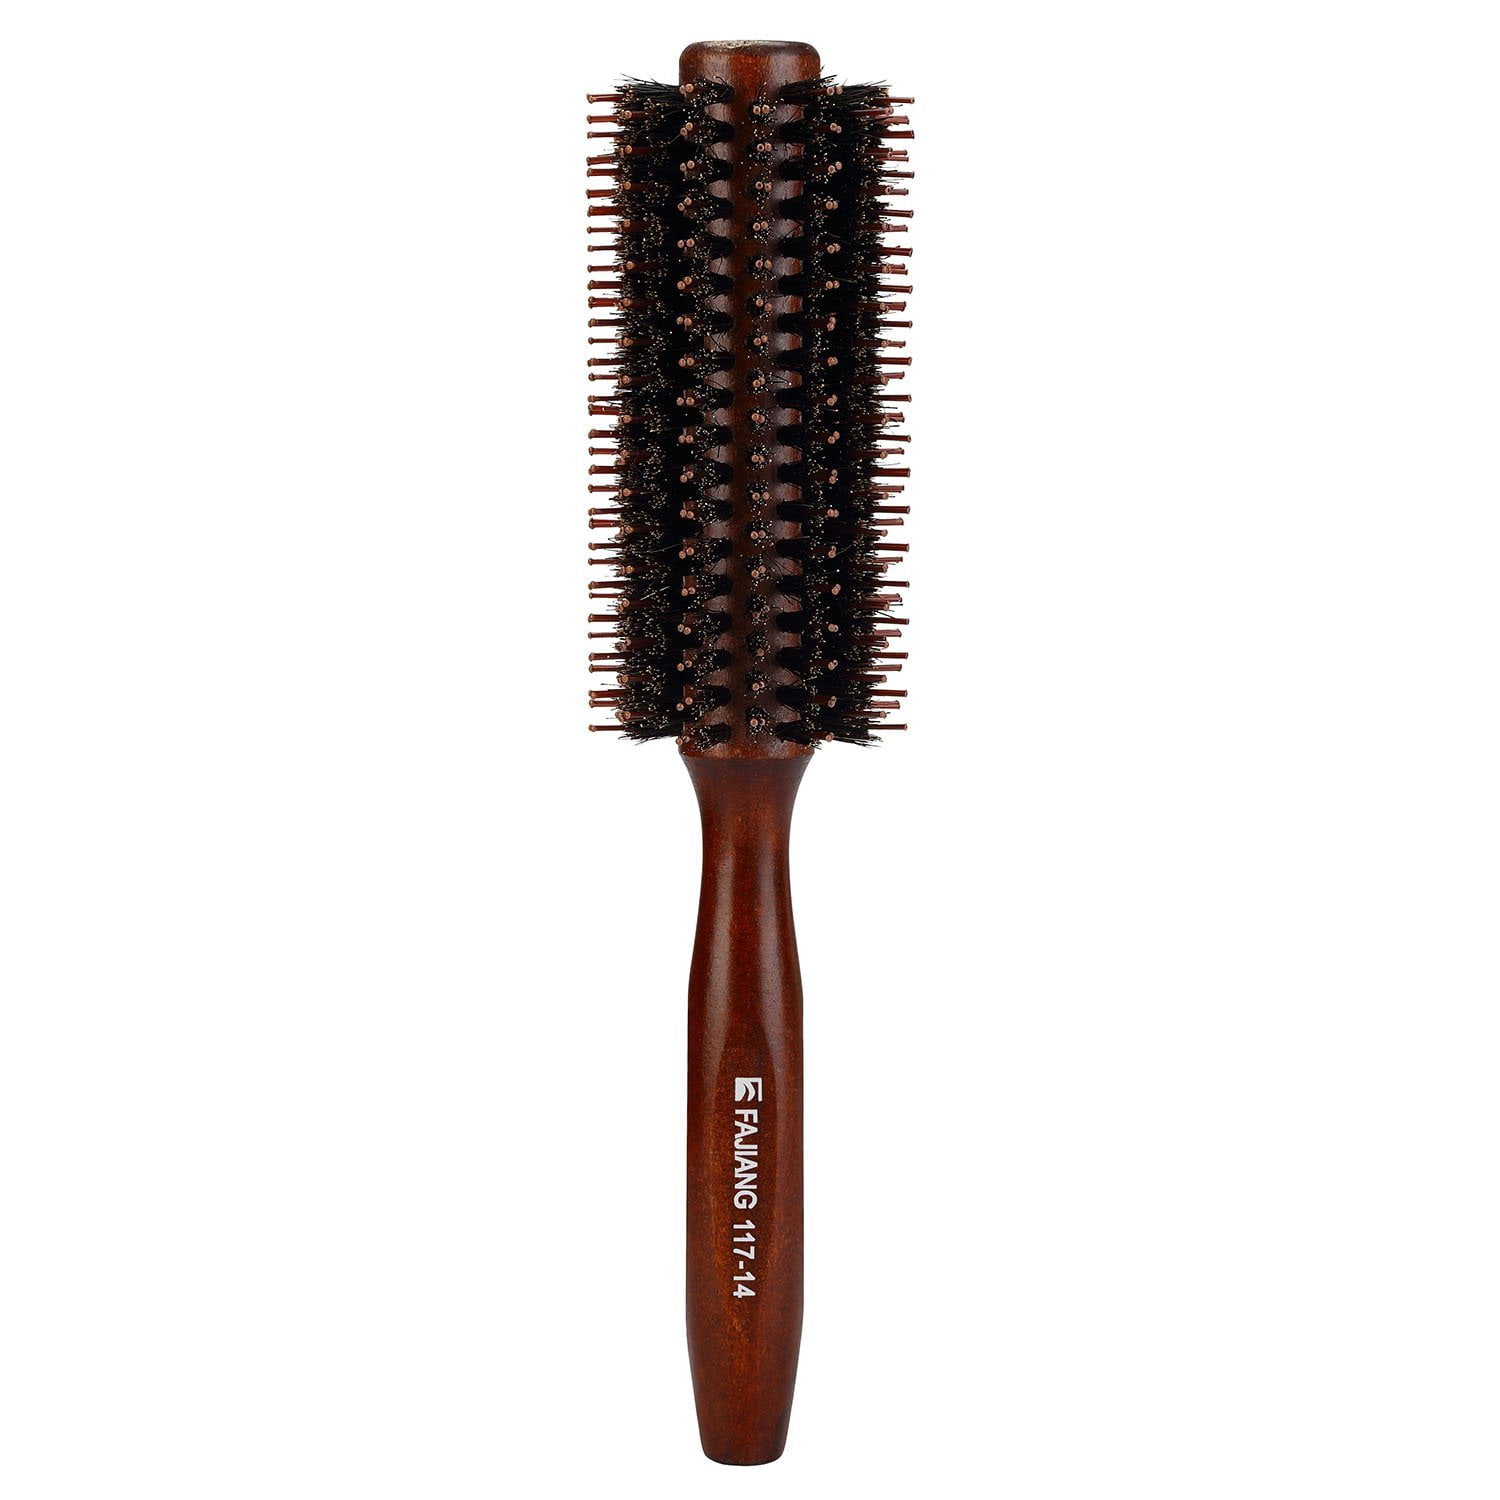 Round Comb Hair Brush with Ergonomic Natural Wood Handle,2.2 Inch, Styling  Essentials for Hair Drying, Styling, Curling TIKA 